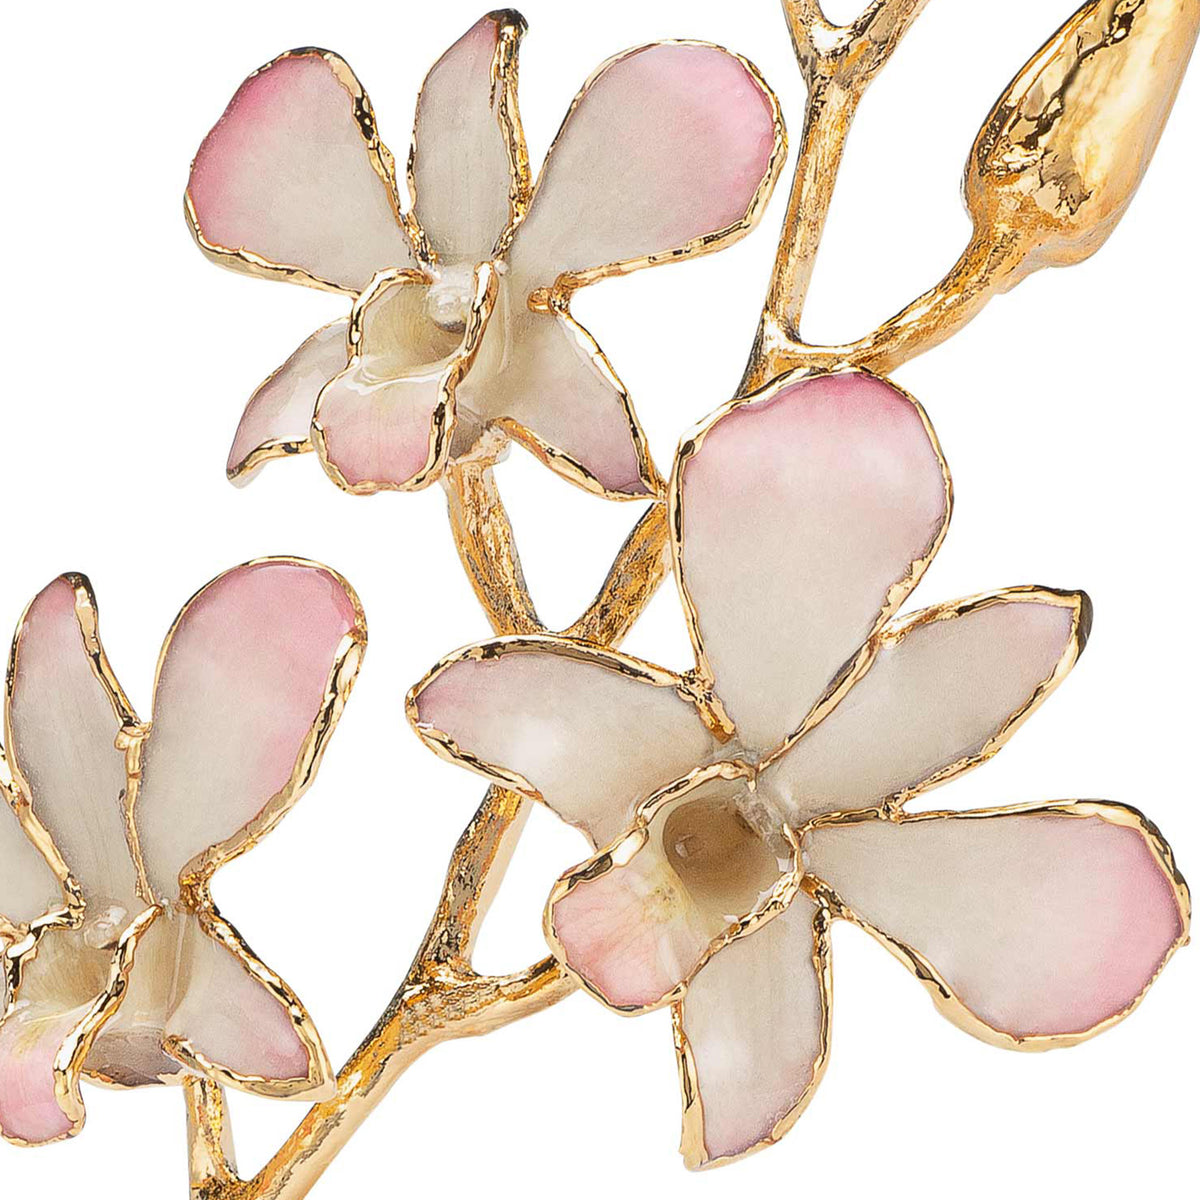 24K Gold Dipped Orchid in White to Pink view of gold stem and flowers closeup view showing detail of flowers